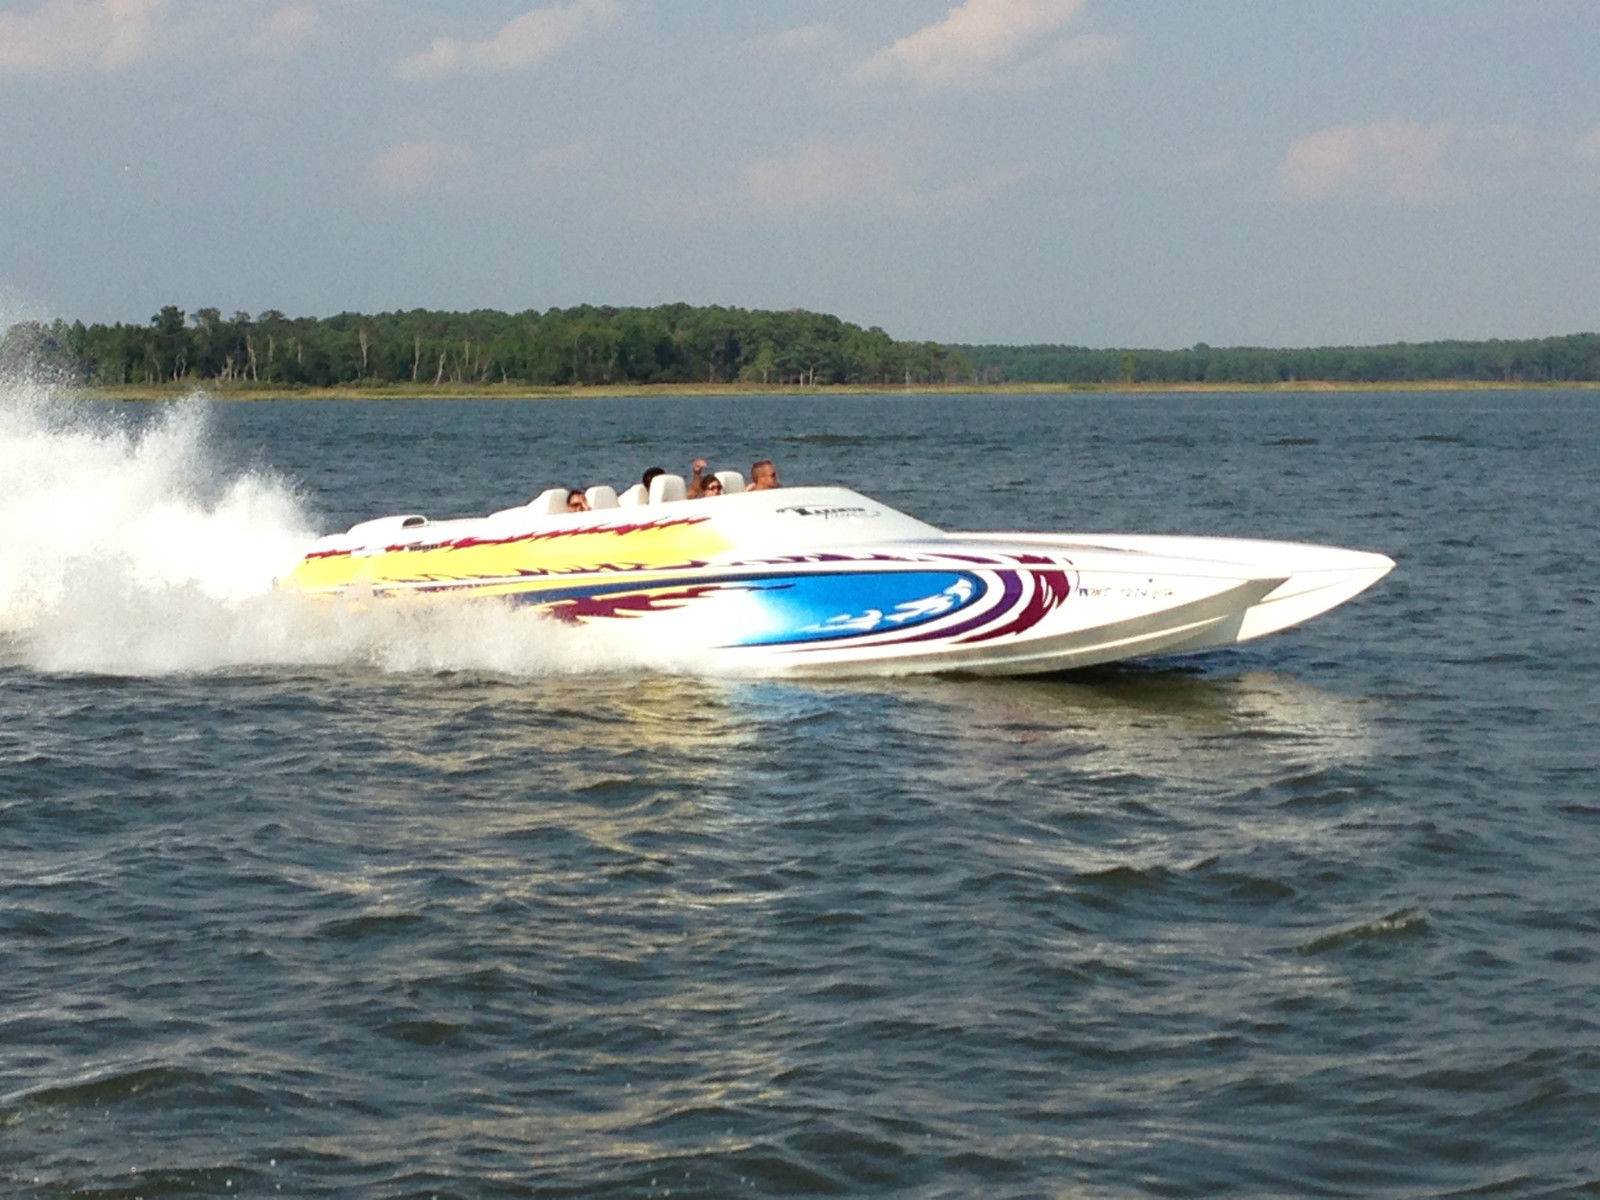 Maximum Thunder Cat 2002 for sale for $10,000 - Boats-from ...